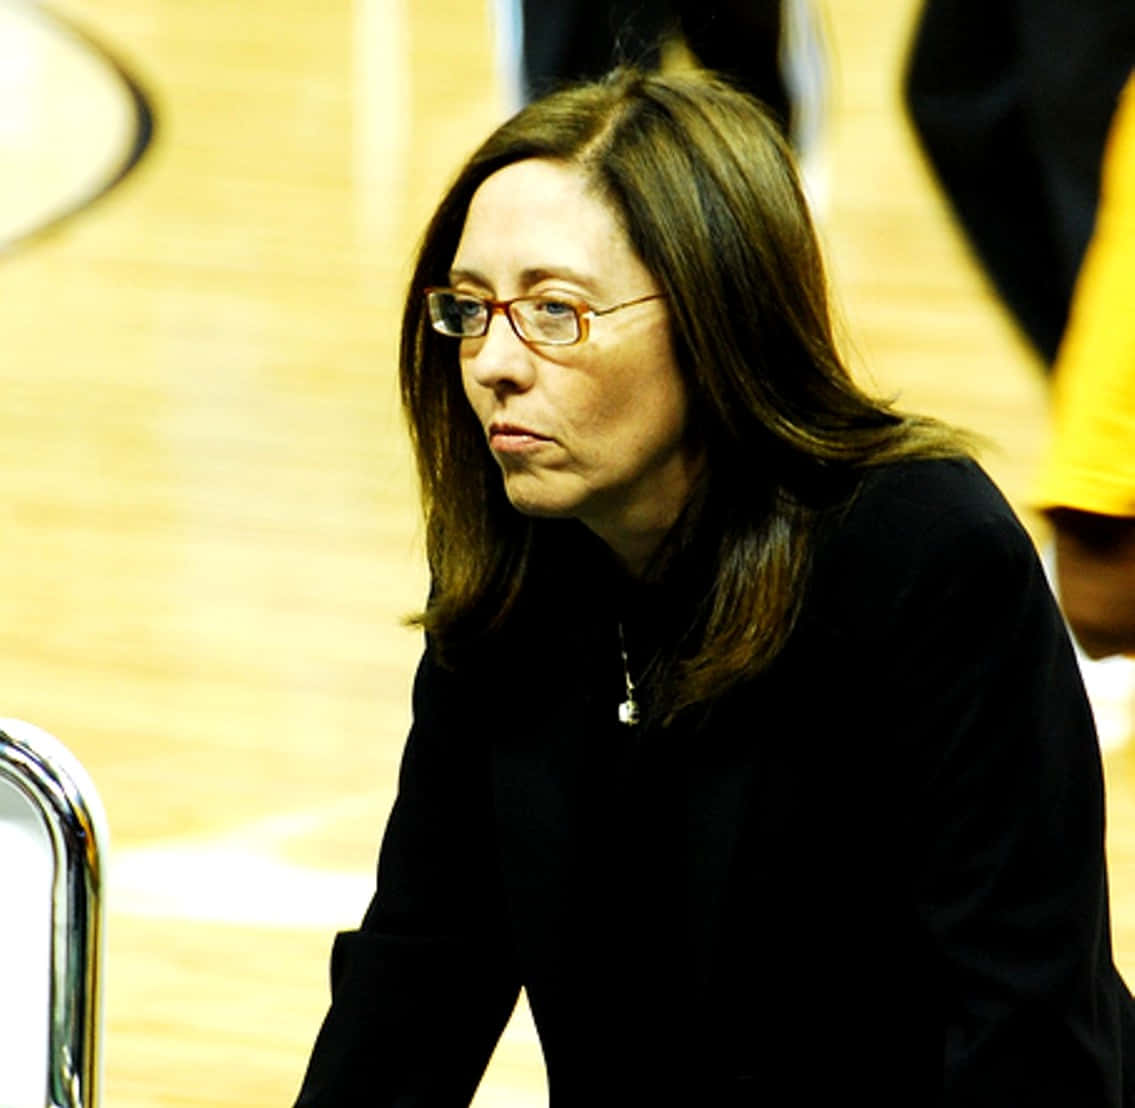 Maria Cantwell Serious Wallpaper